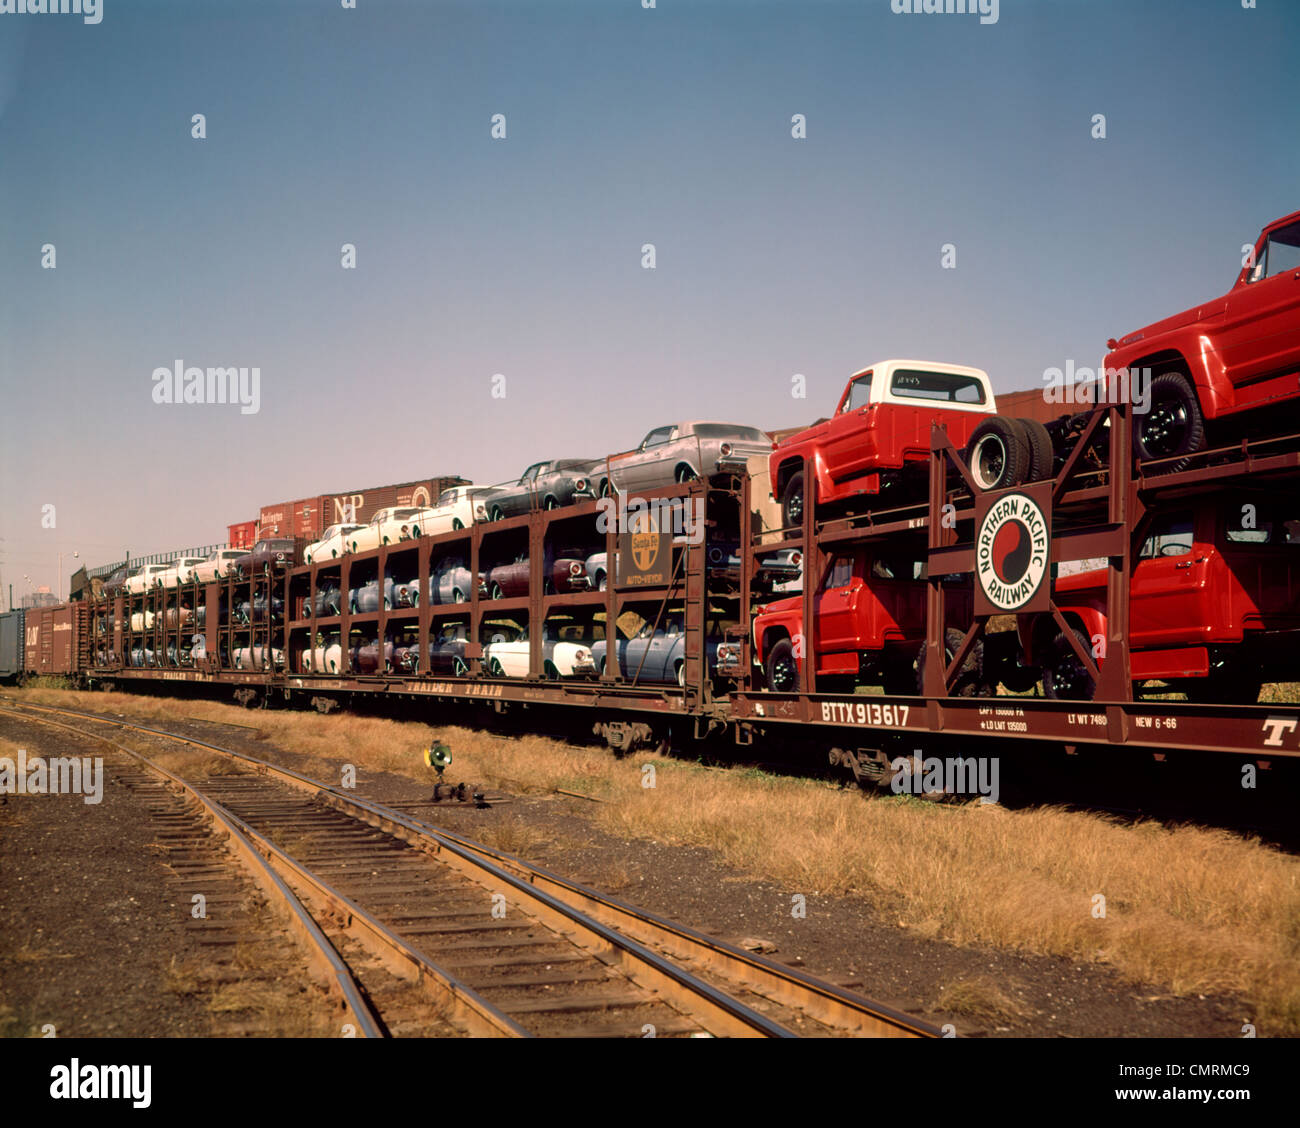 1960 1960s NEW CARS & TRUCKS TRANSPORTED ON NORTHERN PACIFIC RAILROAD RAILWAY TRAIN TRANSPORTATION Stock Photo